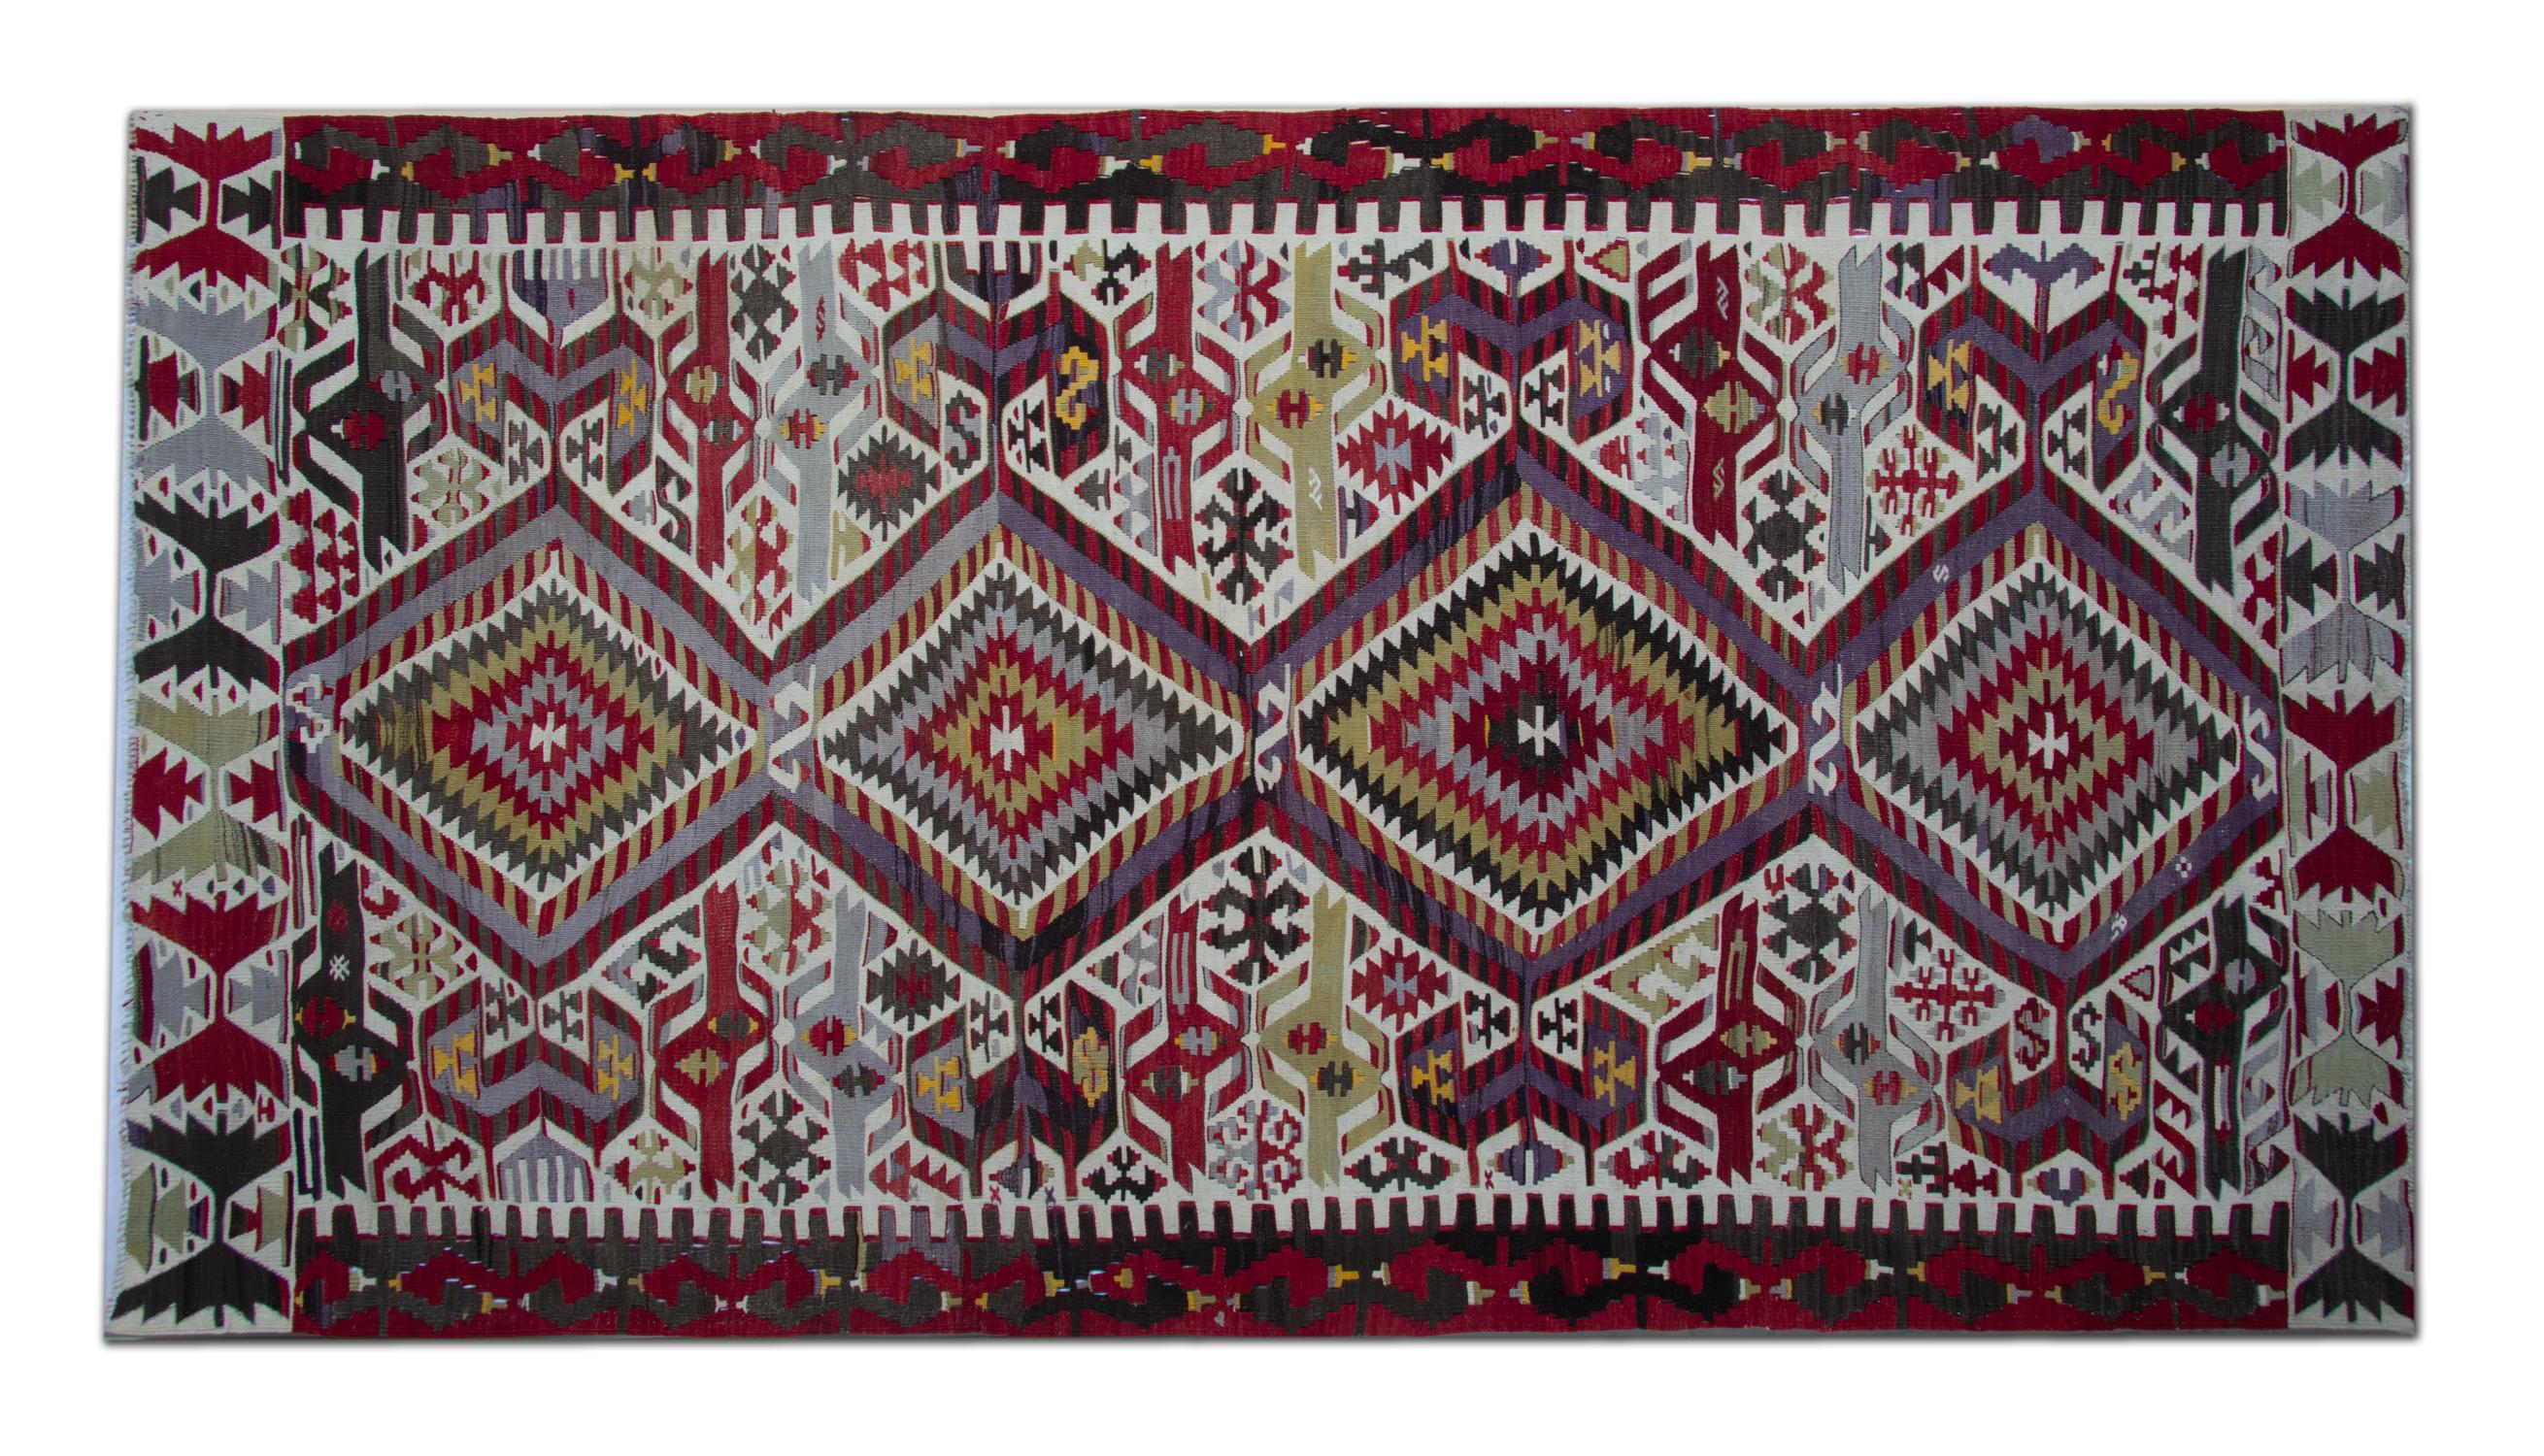 This handmade carpet Turkish rug is an antique rug traditional handwoven runner rug that comes from Turkey. The carpet design world. This kind of carpet runner is suitable for stair runners and hallway rugs or Living room rugs. In a striking colour